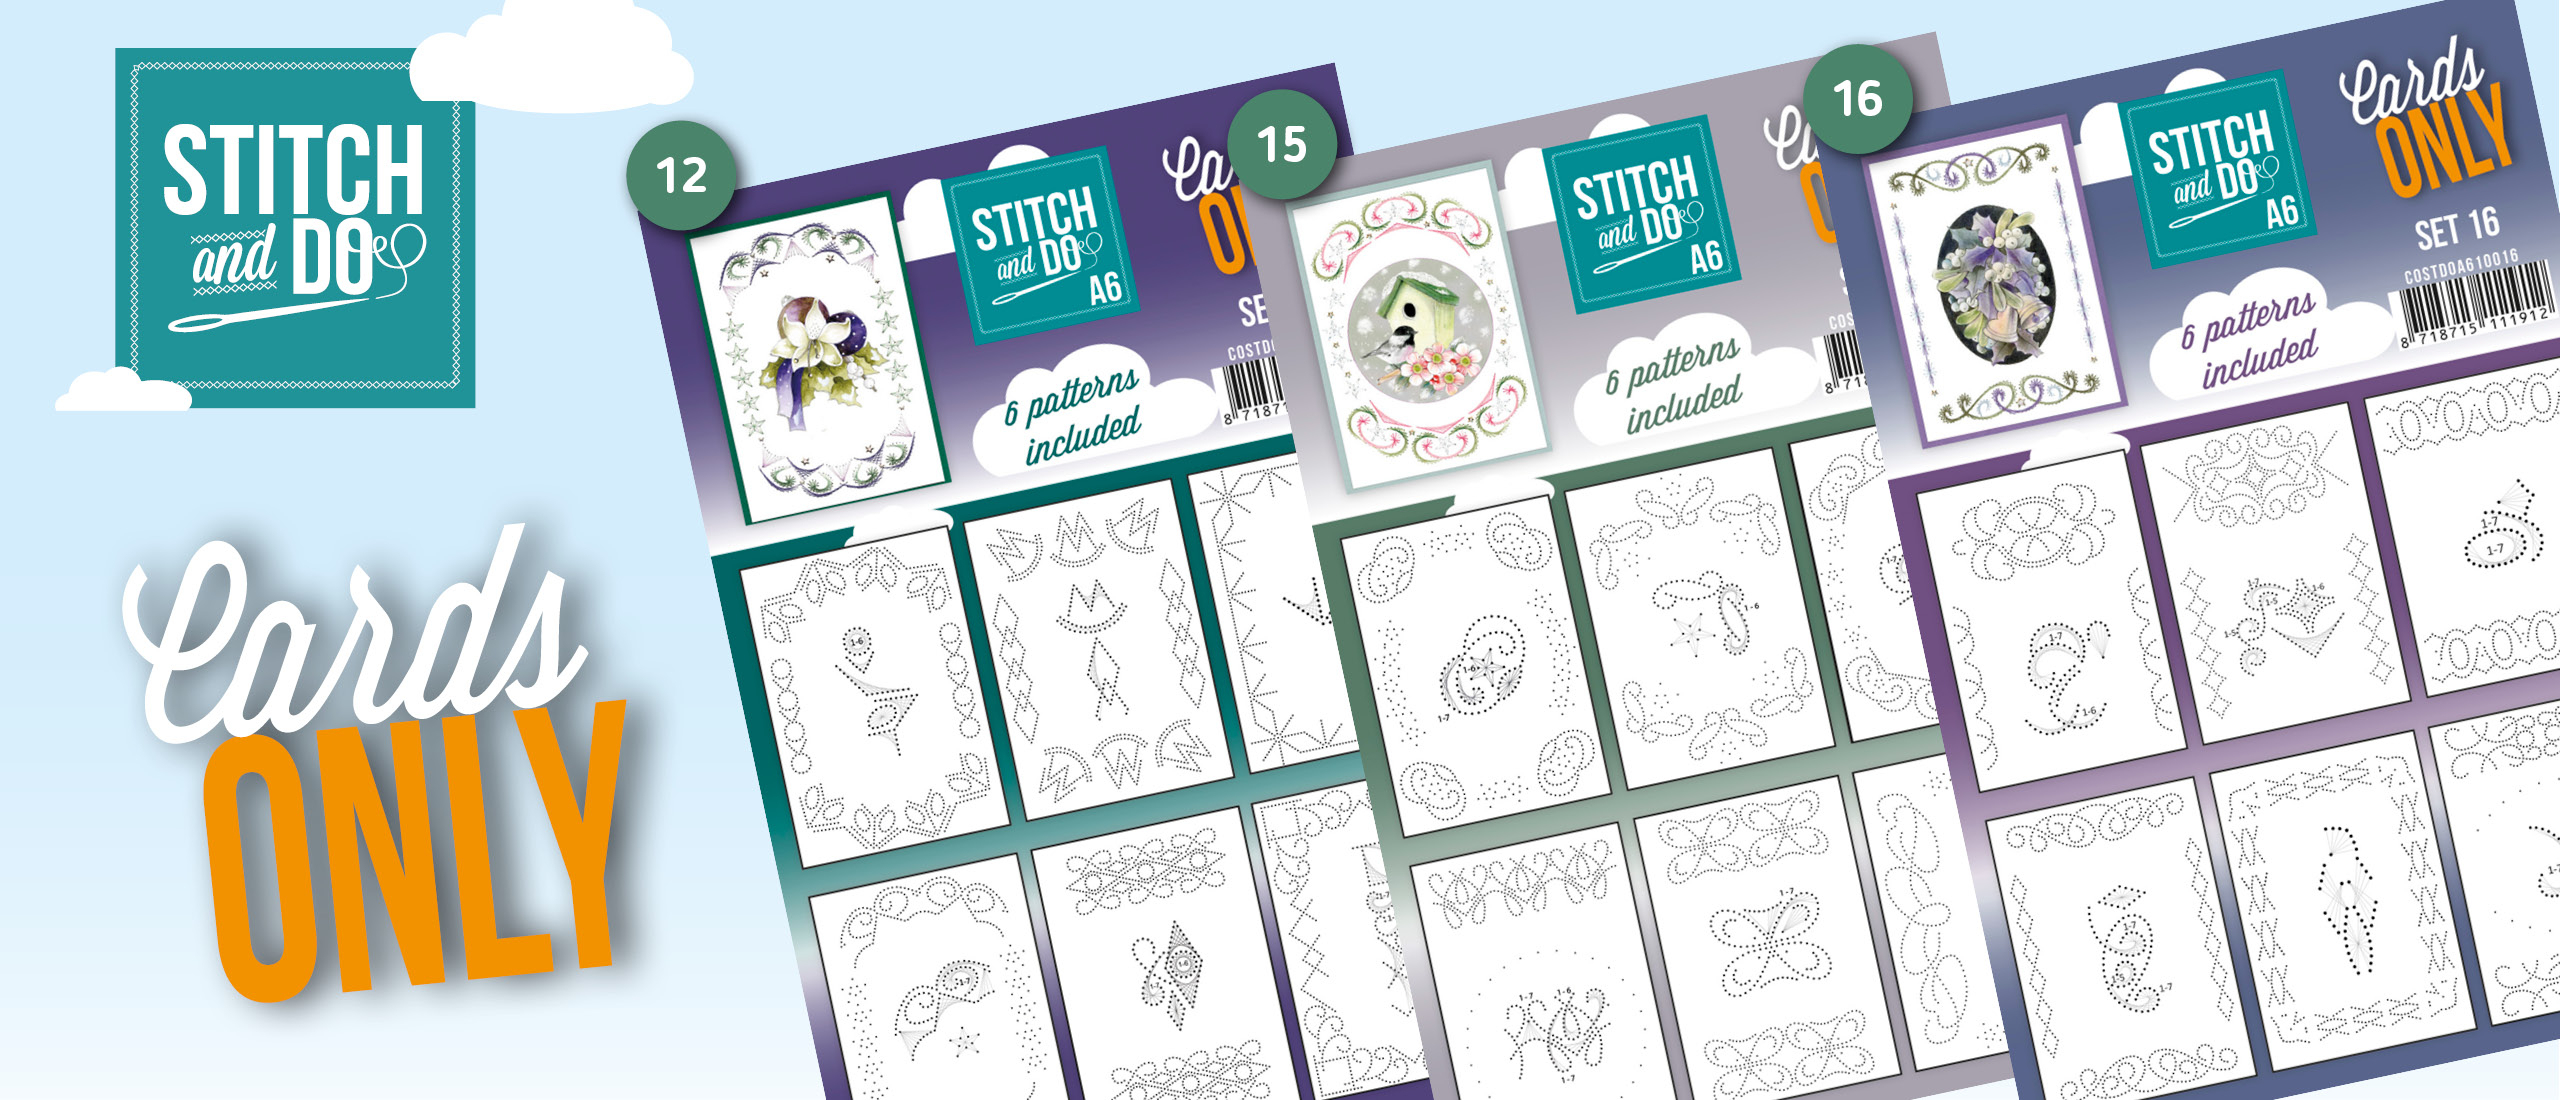 Yay, ze zijn er weer: A6 Cards Only A6 Nr. 12, 15 en 16 van Stitch and Do !